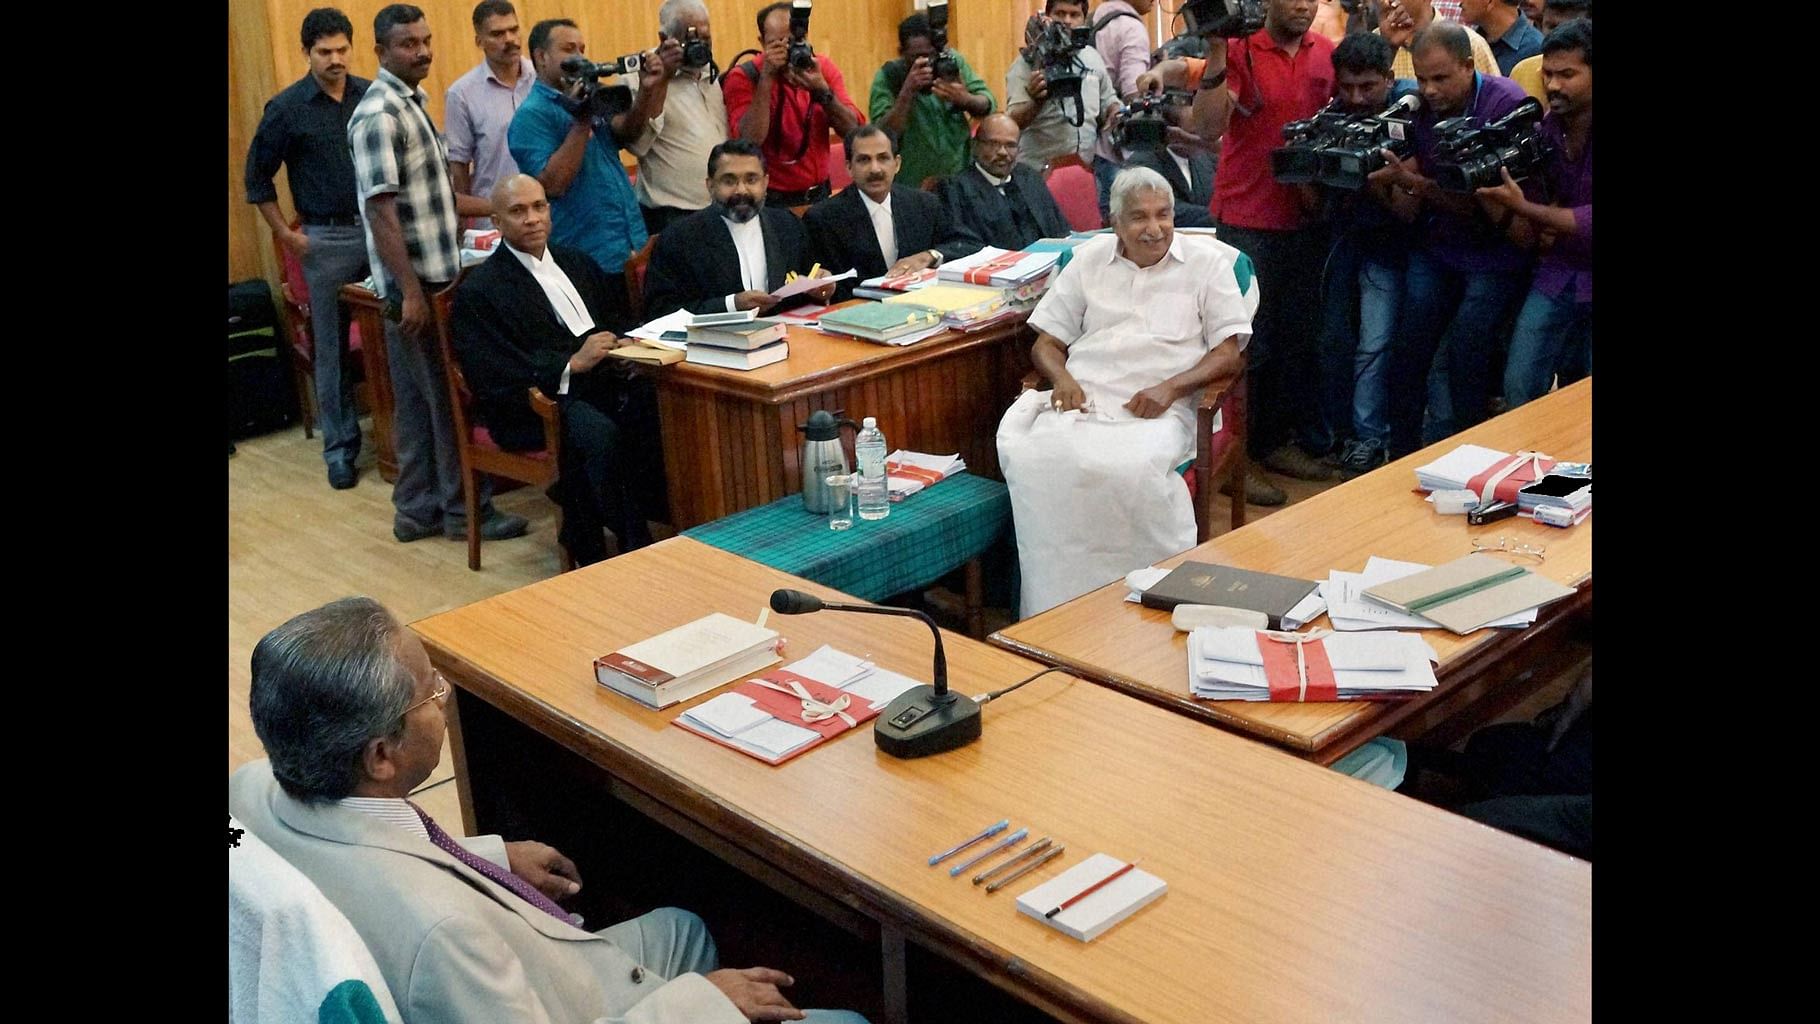 Kerala Chief Minister Oommen Chandy smiling in court. (Photo: PTI)